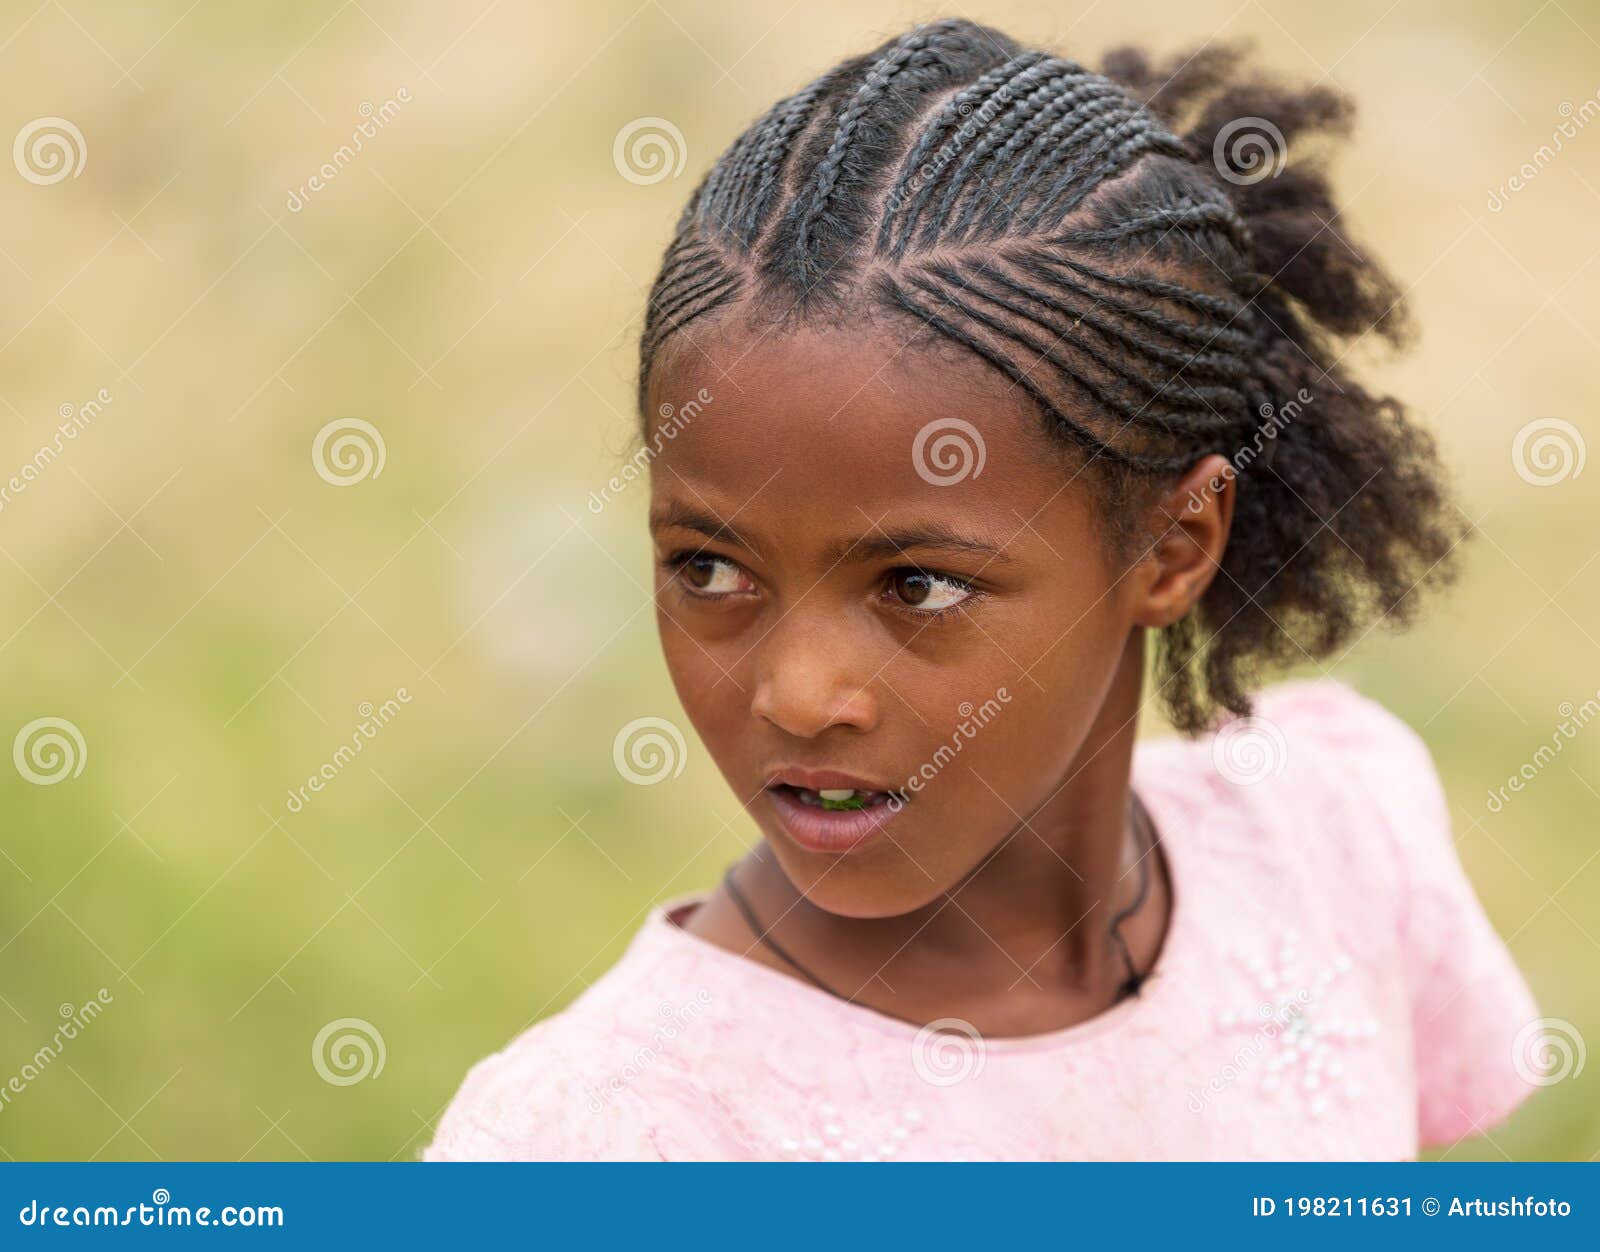 Girl with Traditional Braided Hair Styl, Ethiopia Editorial Photo - Image  of model, ethnic: 198211631